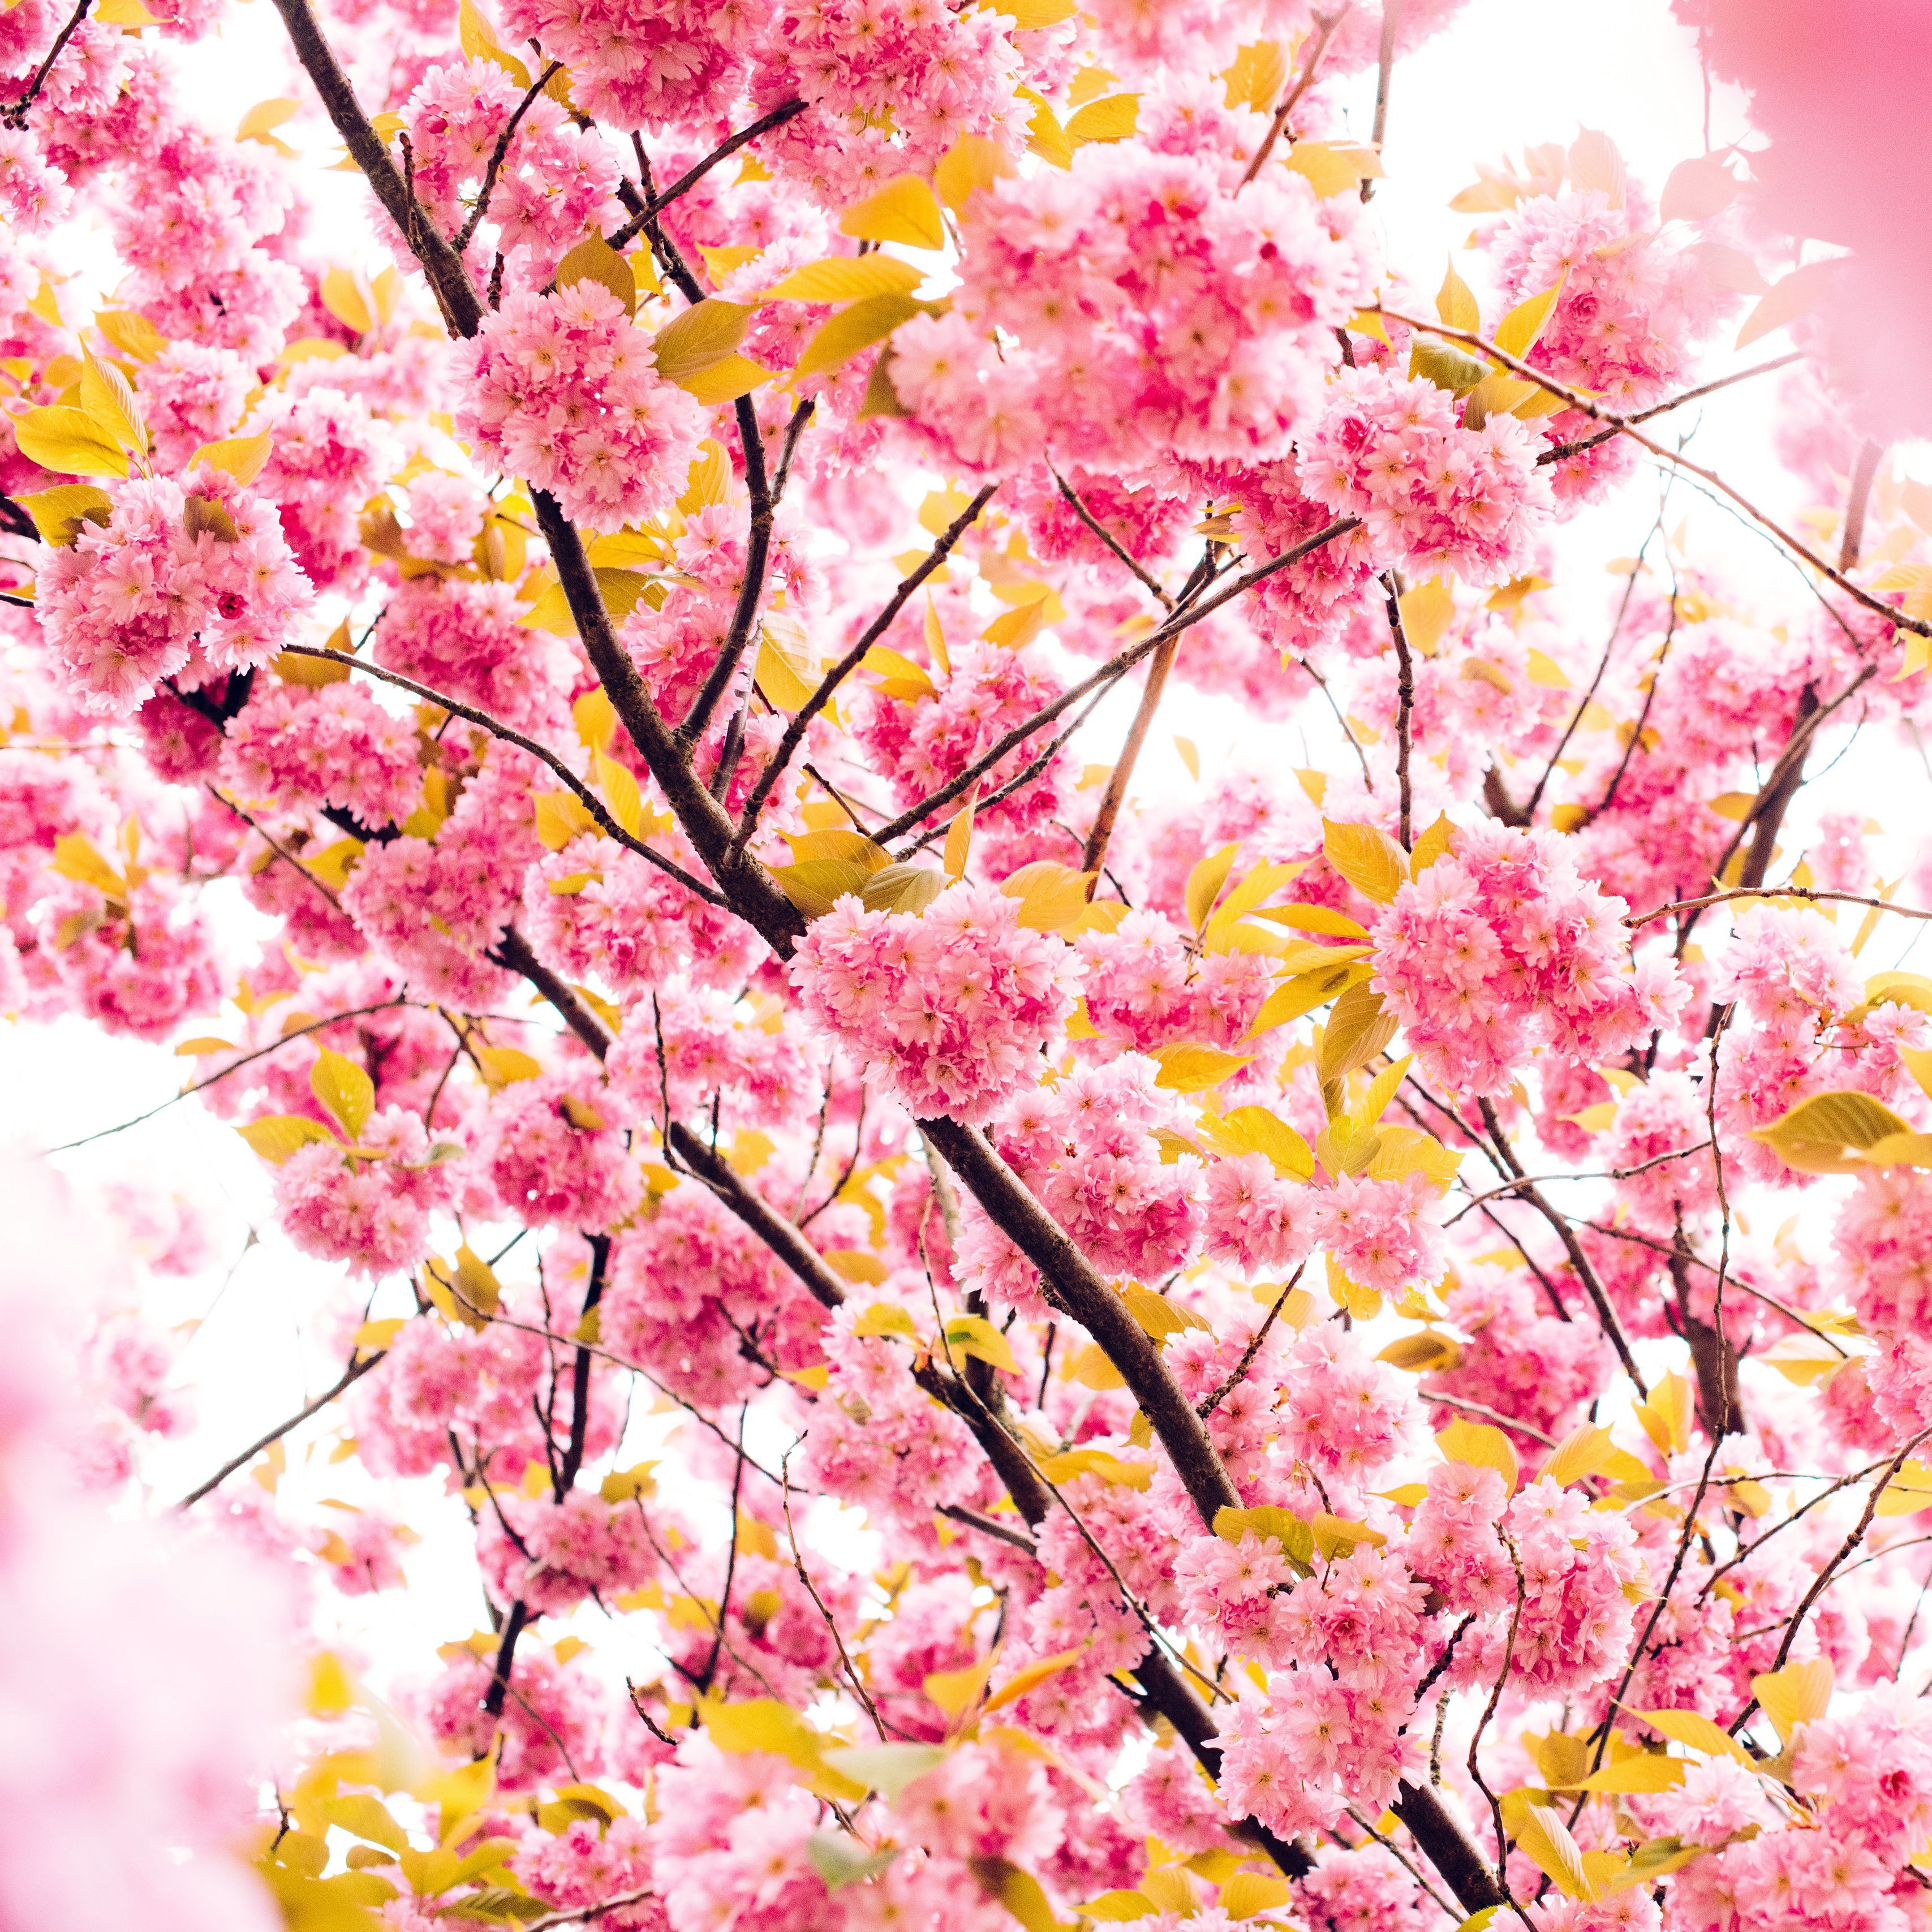 Download wallpaper 3415x3415 cherry, flowers, flowering, tree ipad pro 12.9 retina for parallax HD background